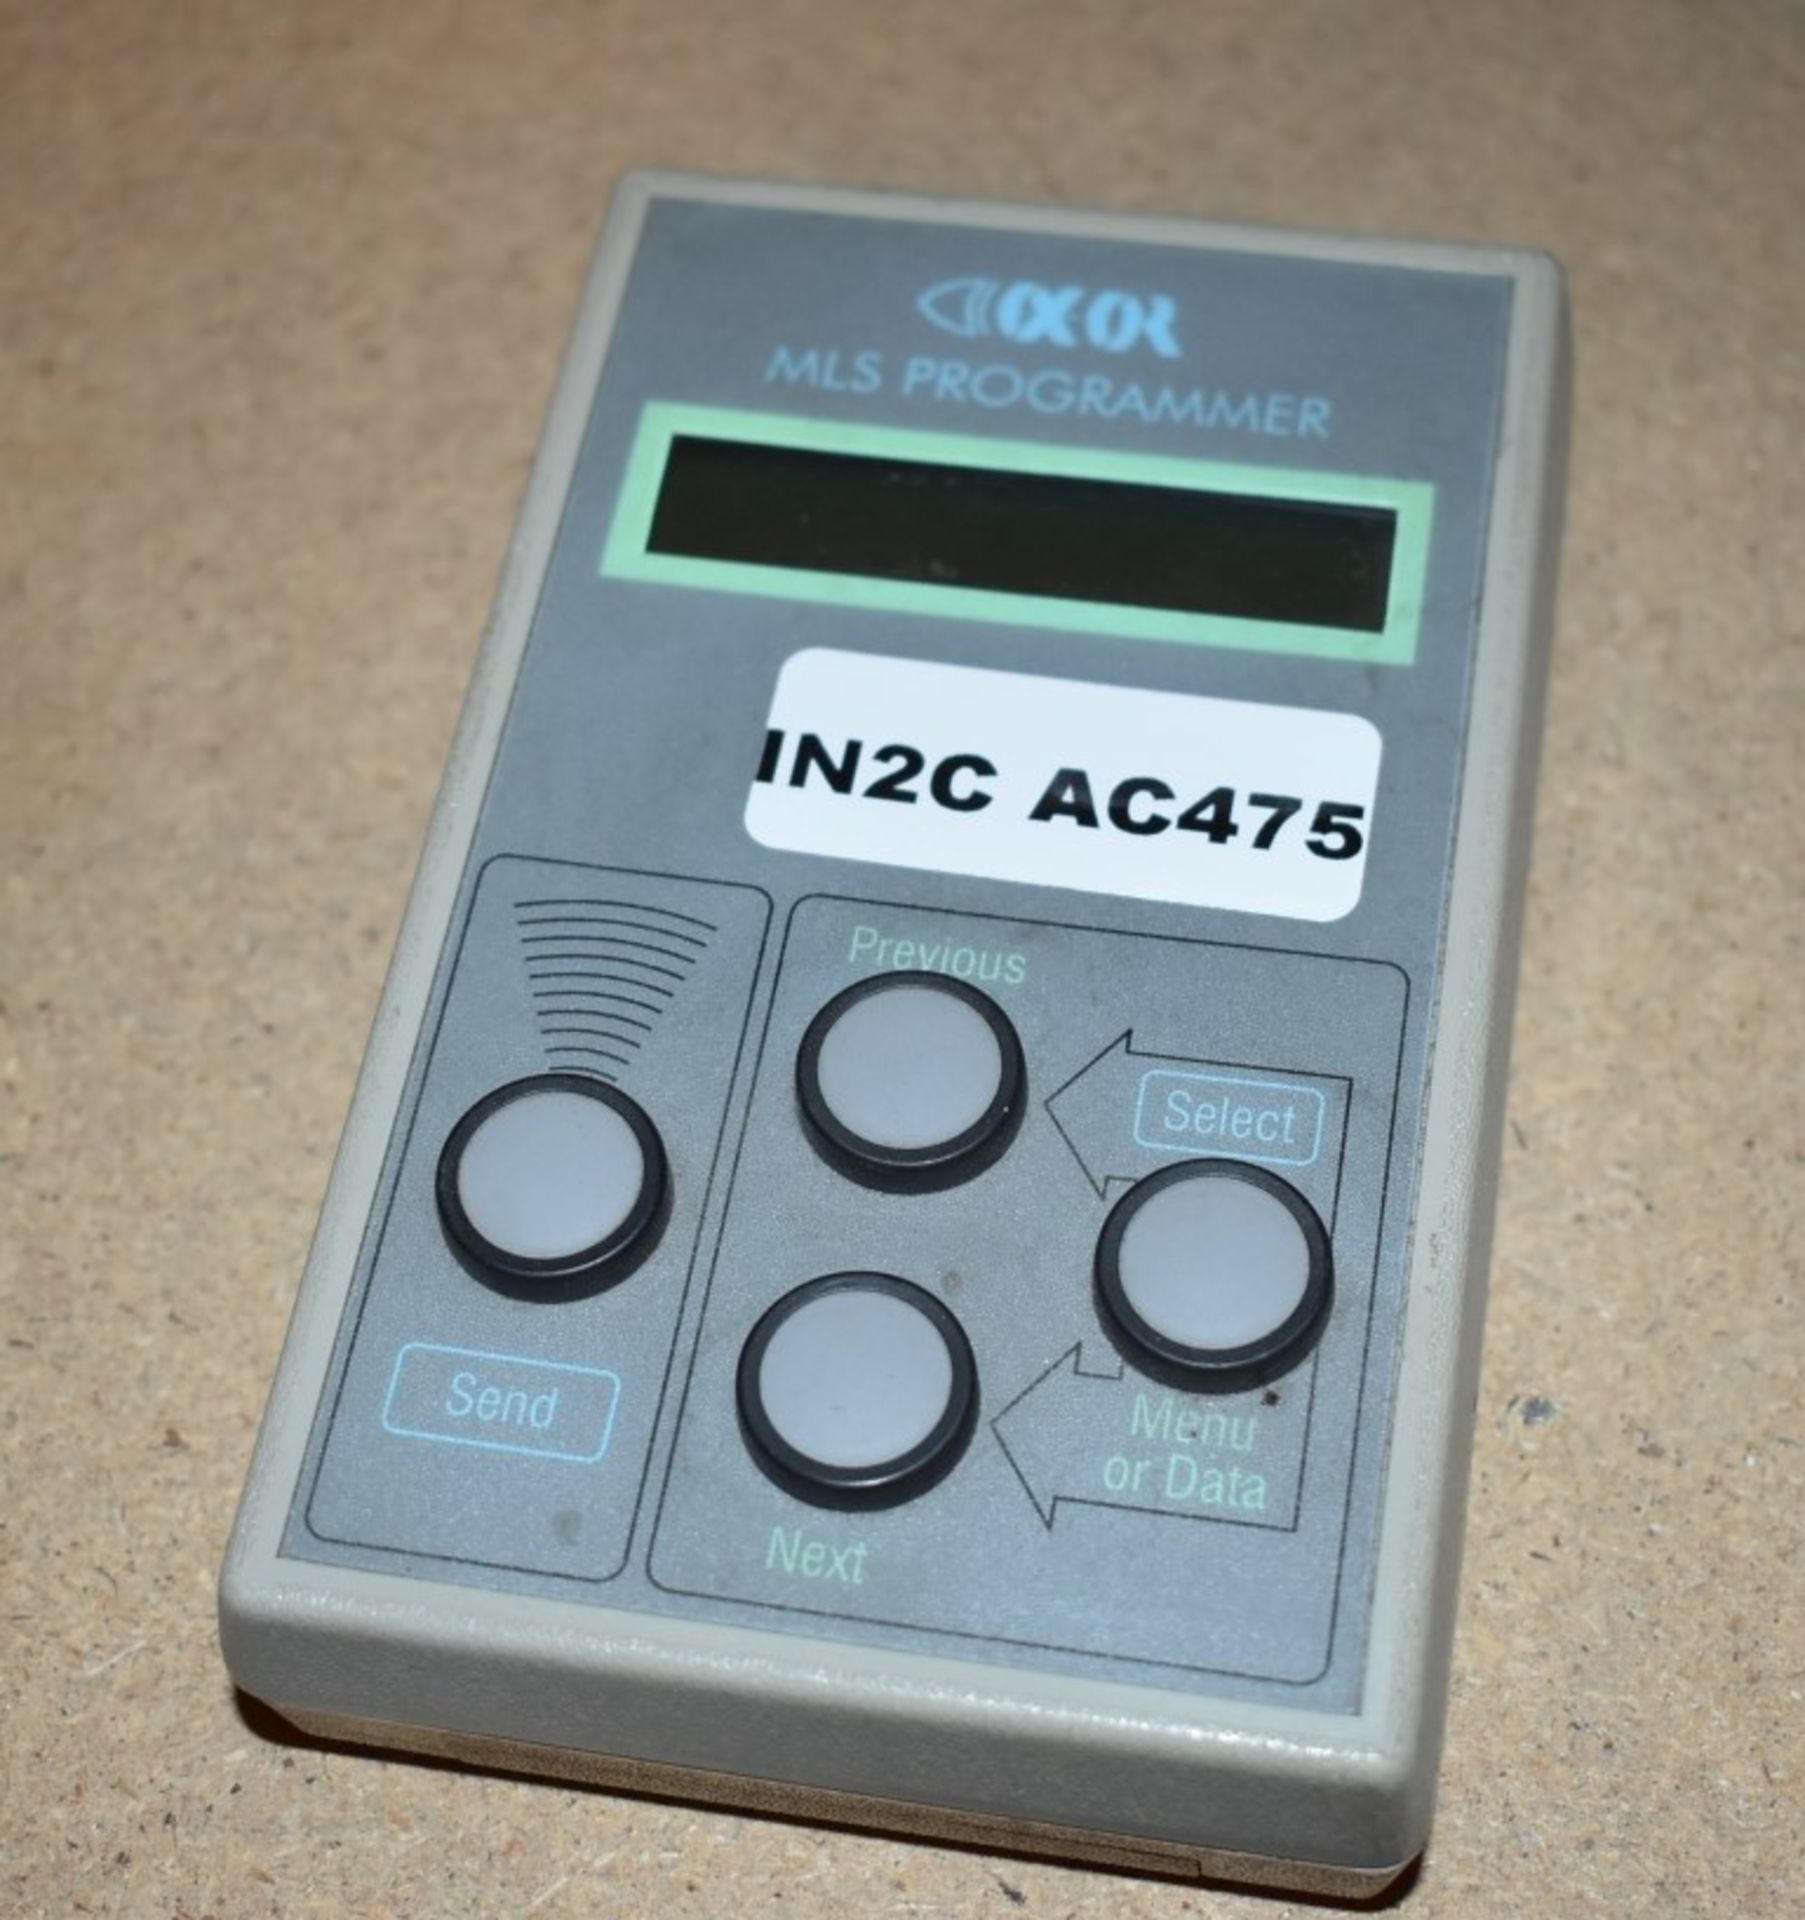 1 x MLS Handheld Programmer - Ref: AC475 GFBR - CL646 - Location: Manchester, M12 Collection - Image 2 of 4